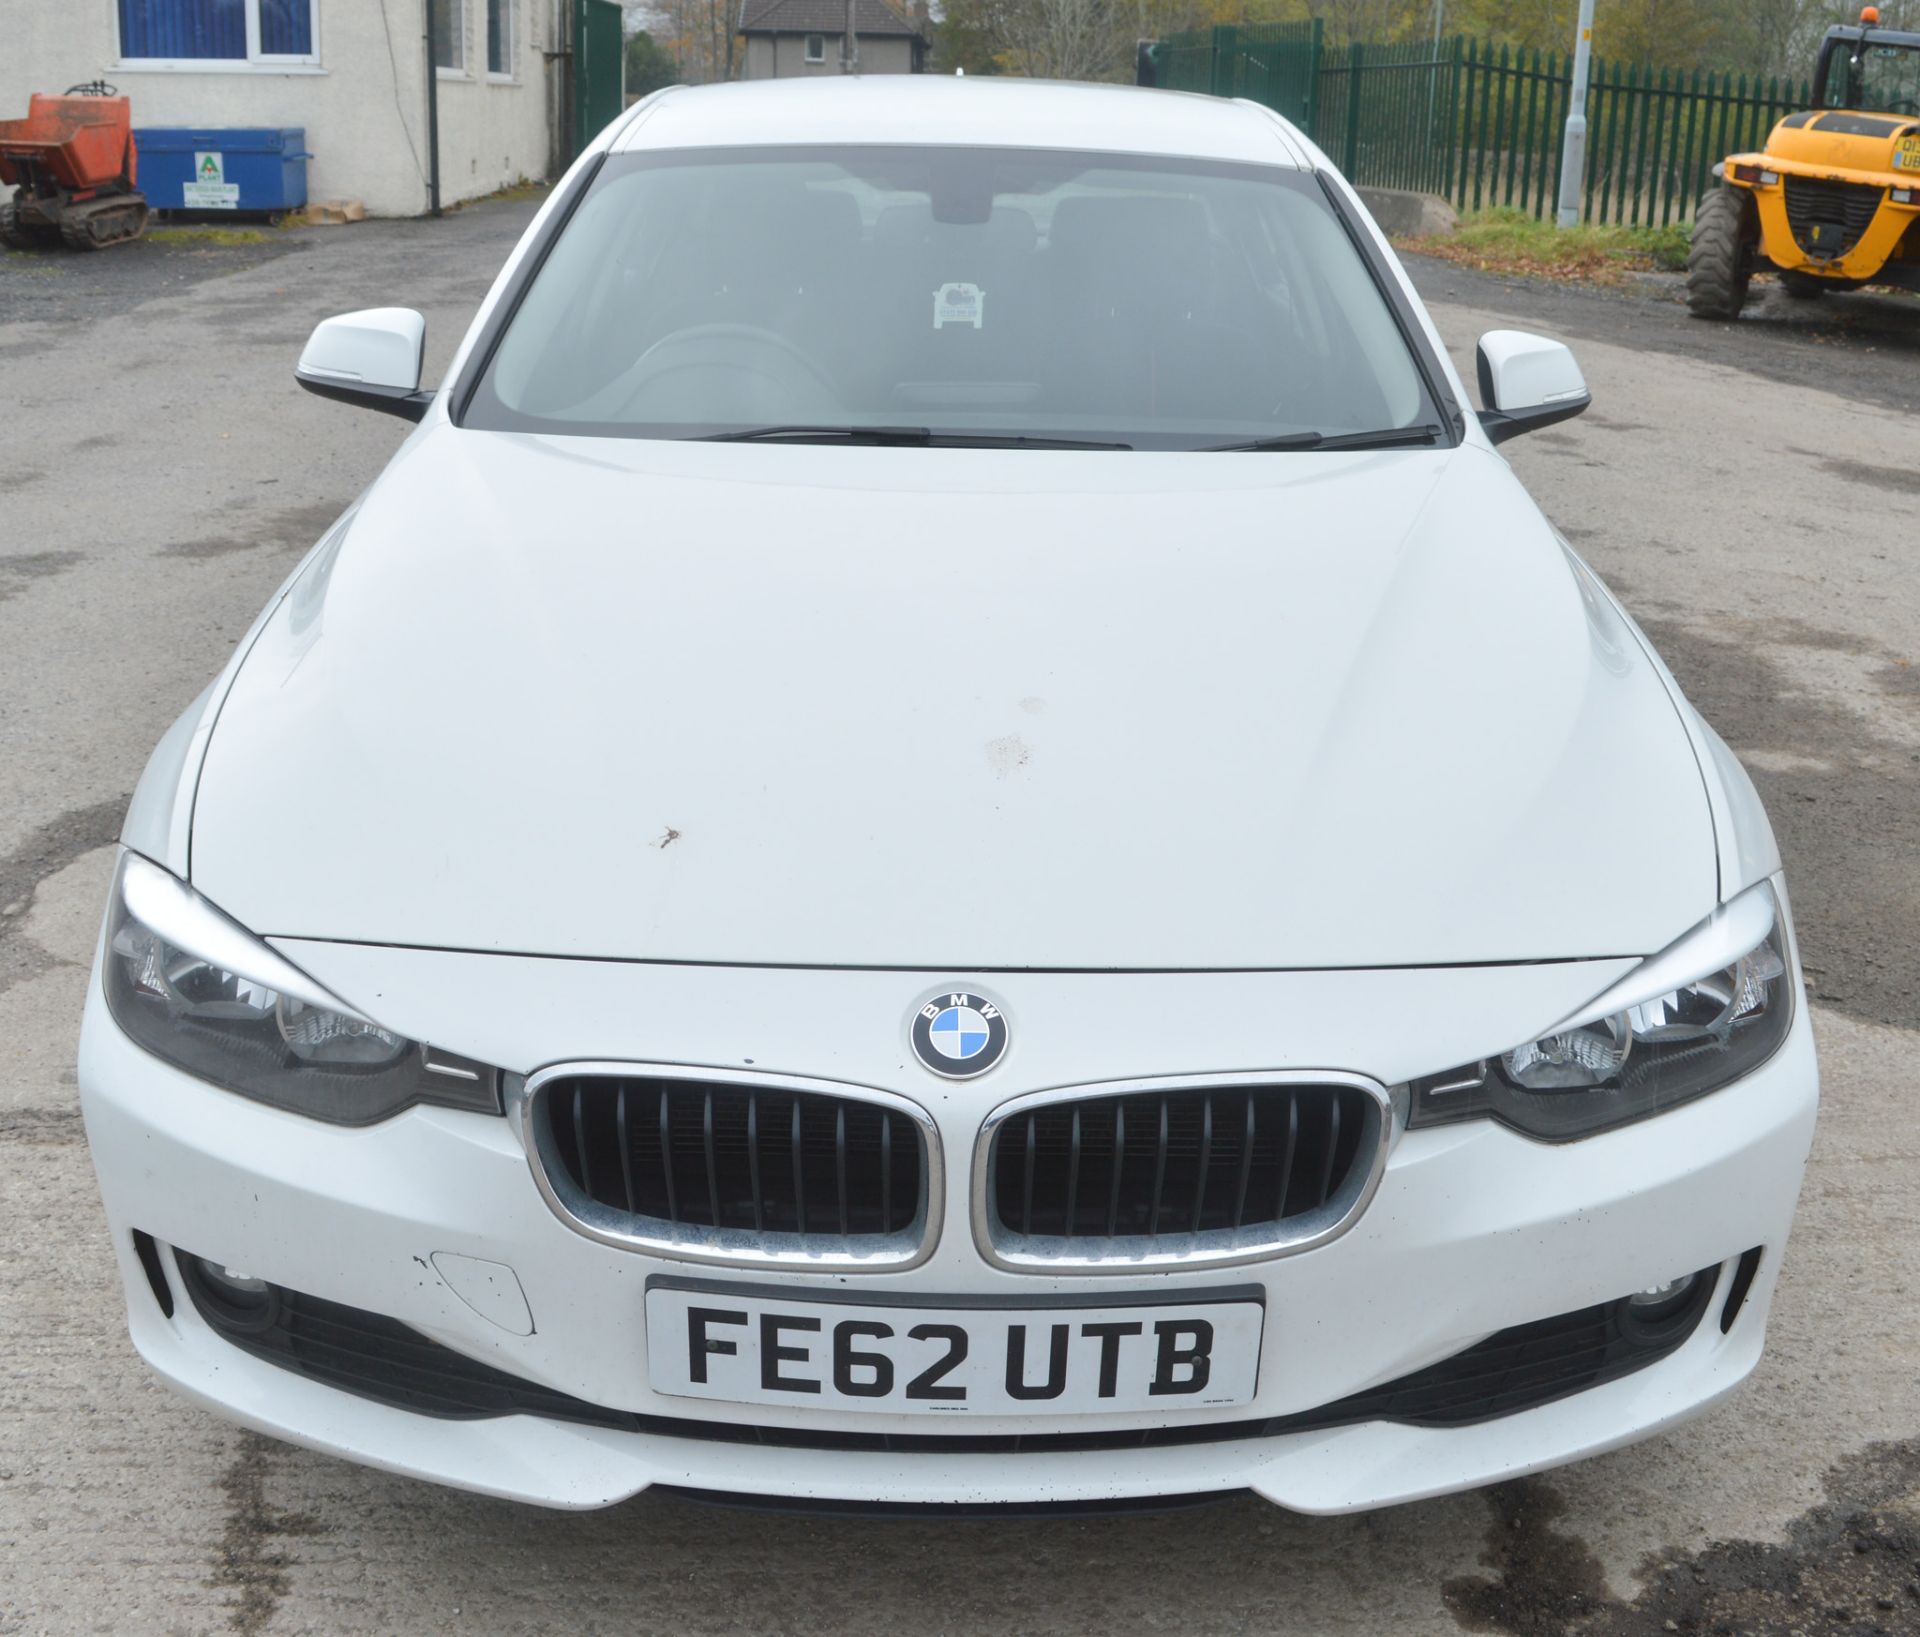 BMW 3 Series 2.0 320d Sport 4dr automatic saloon car  Registration Number: FE62 UTB Date of - Image 5 of 10